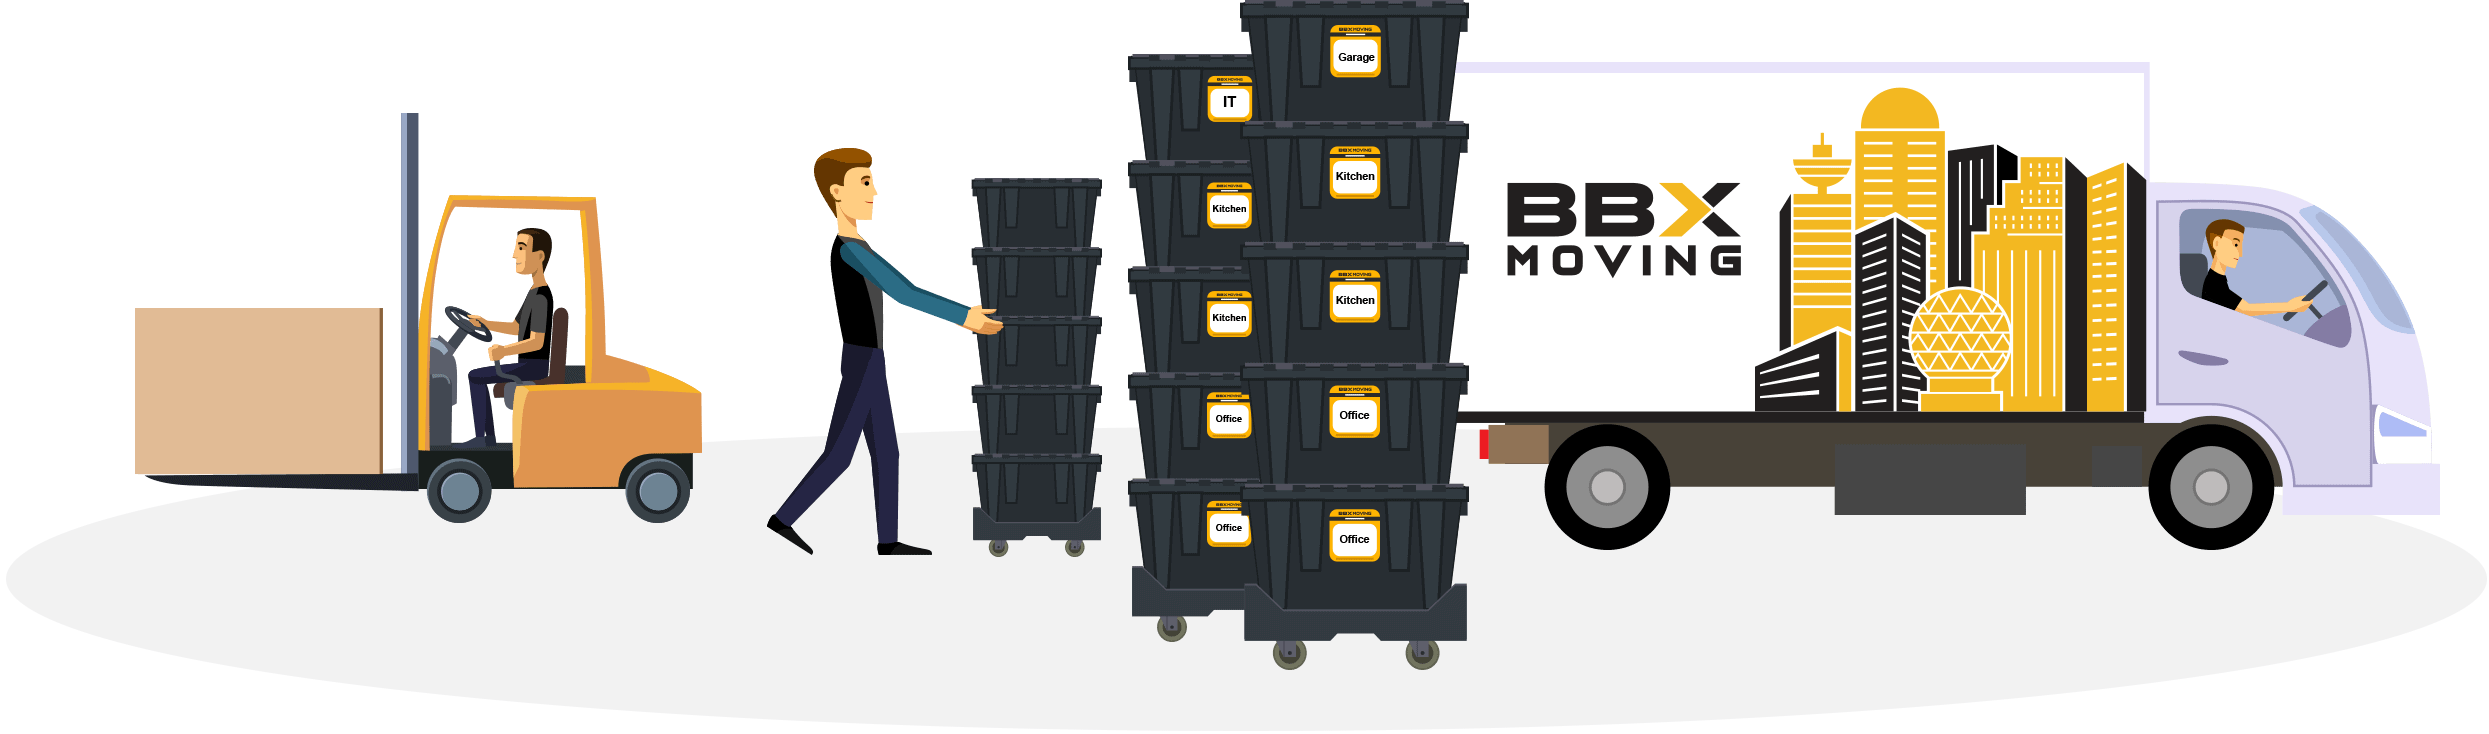 bbx-moving-services-team-page